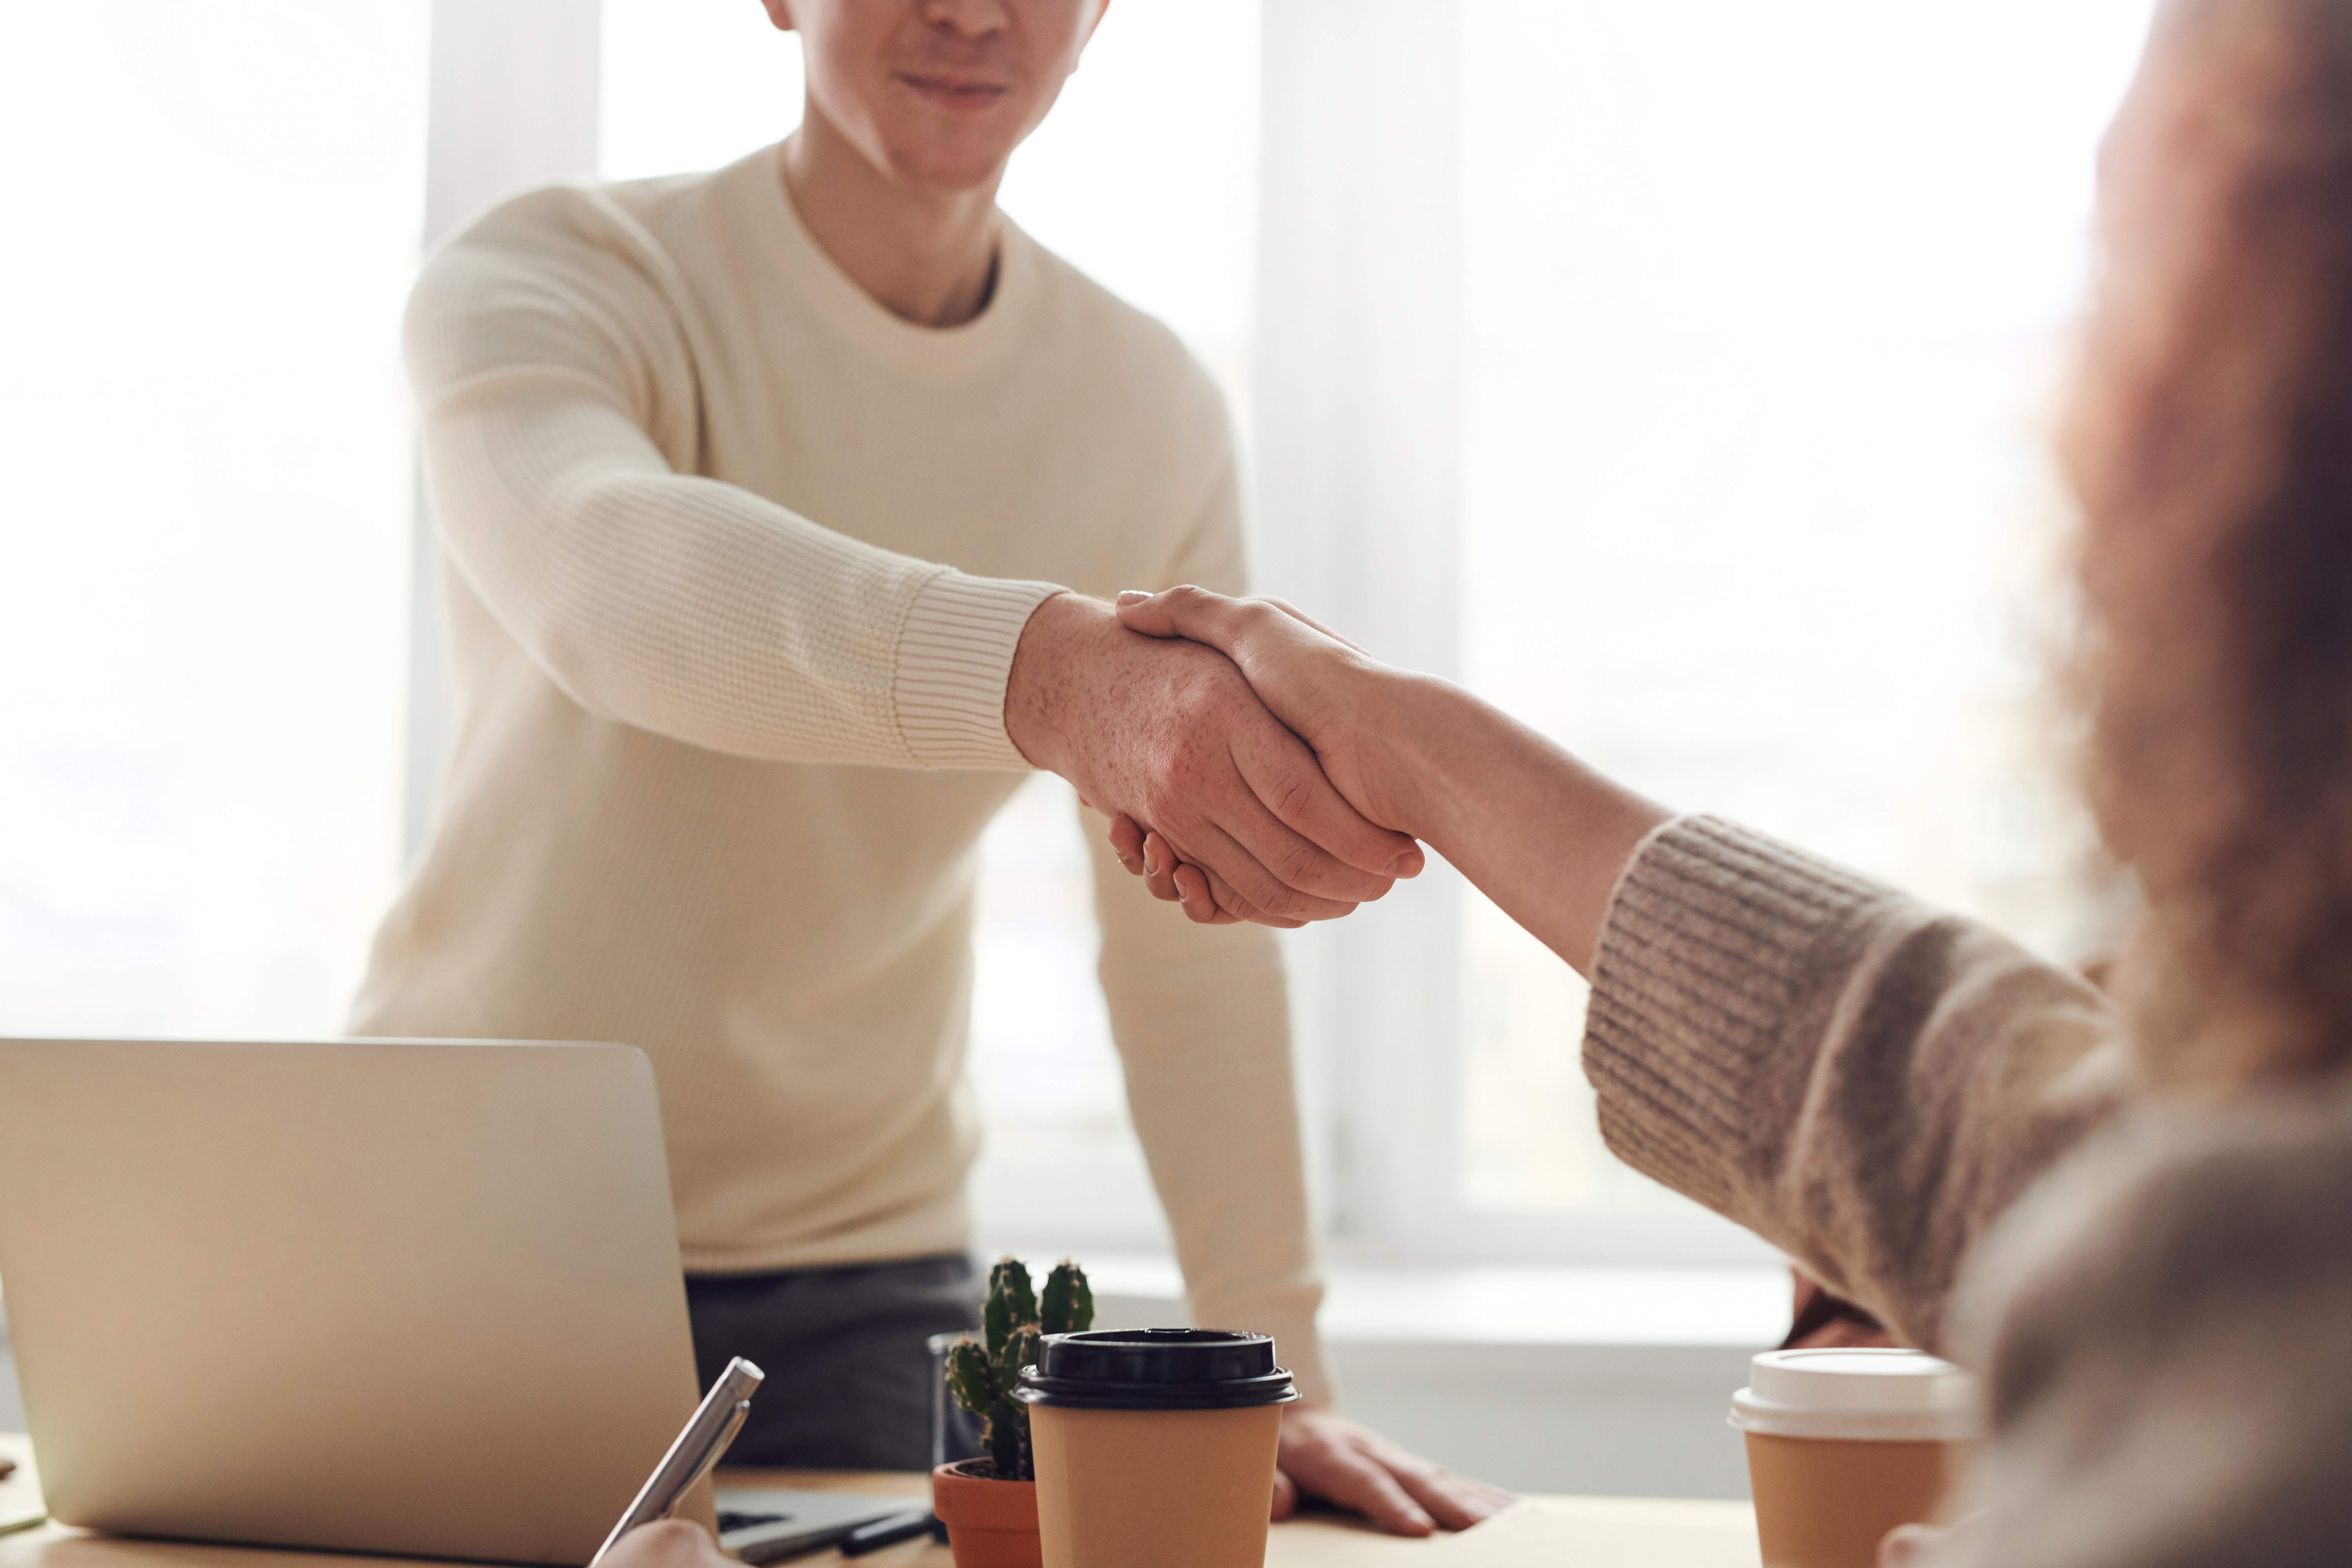 Two people in a handshake because they closed a deal to offer 3pl services for business